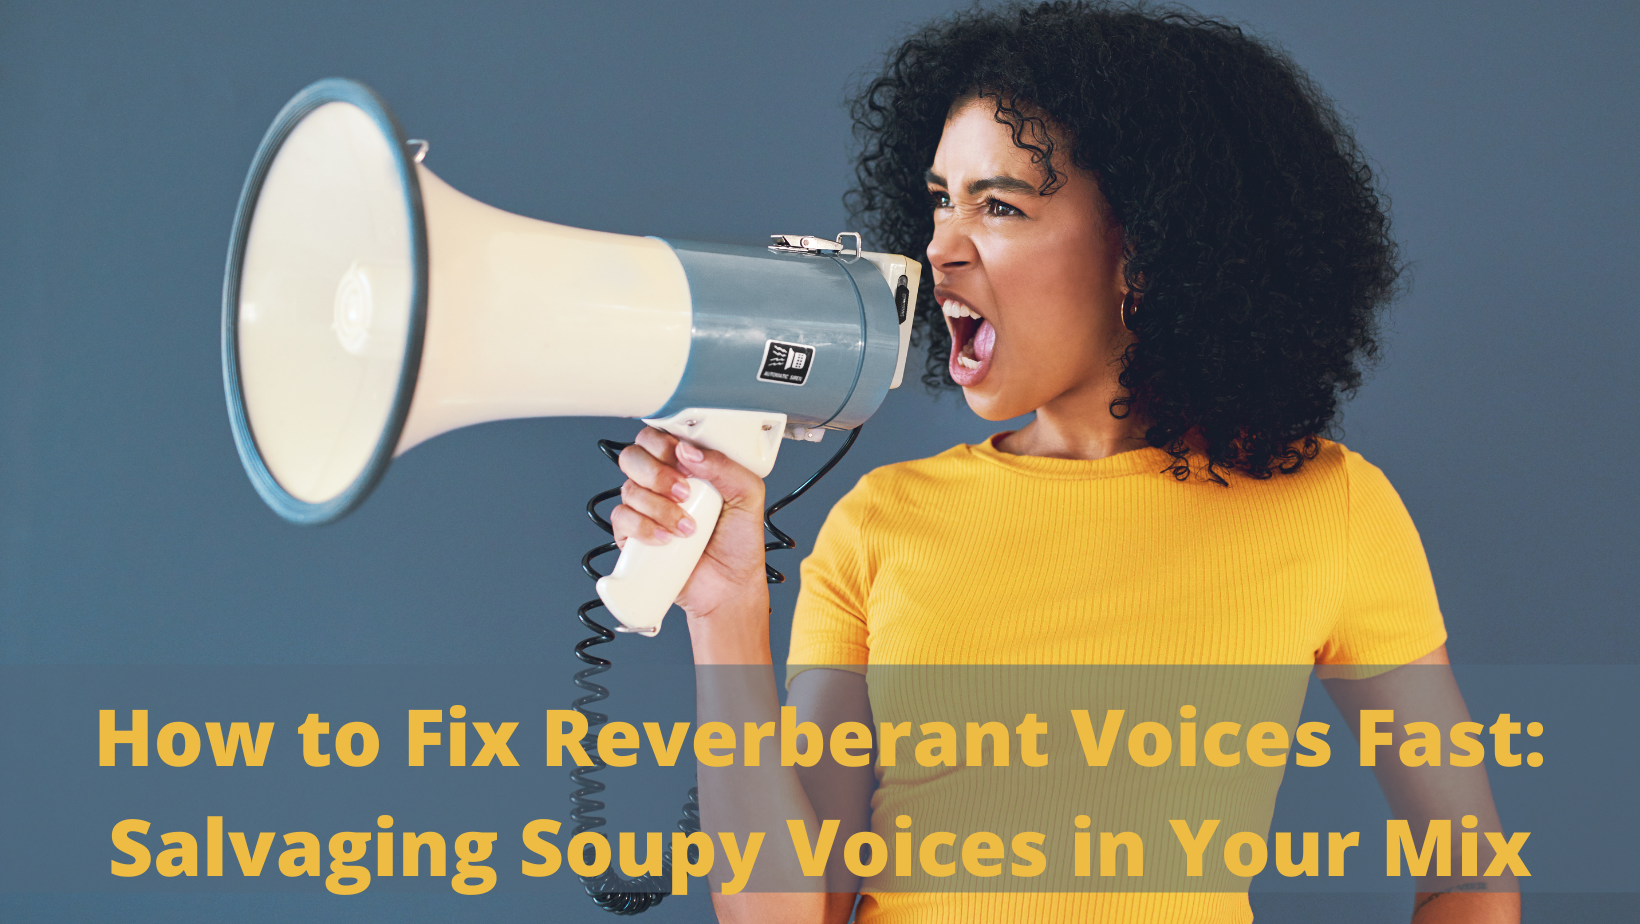 How to Fix Reverberant Voices Fast: Salvaging Soupy Voices in Your Mix